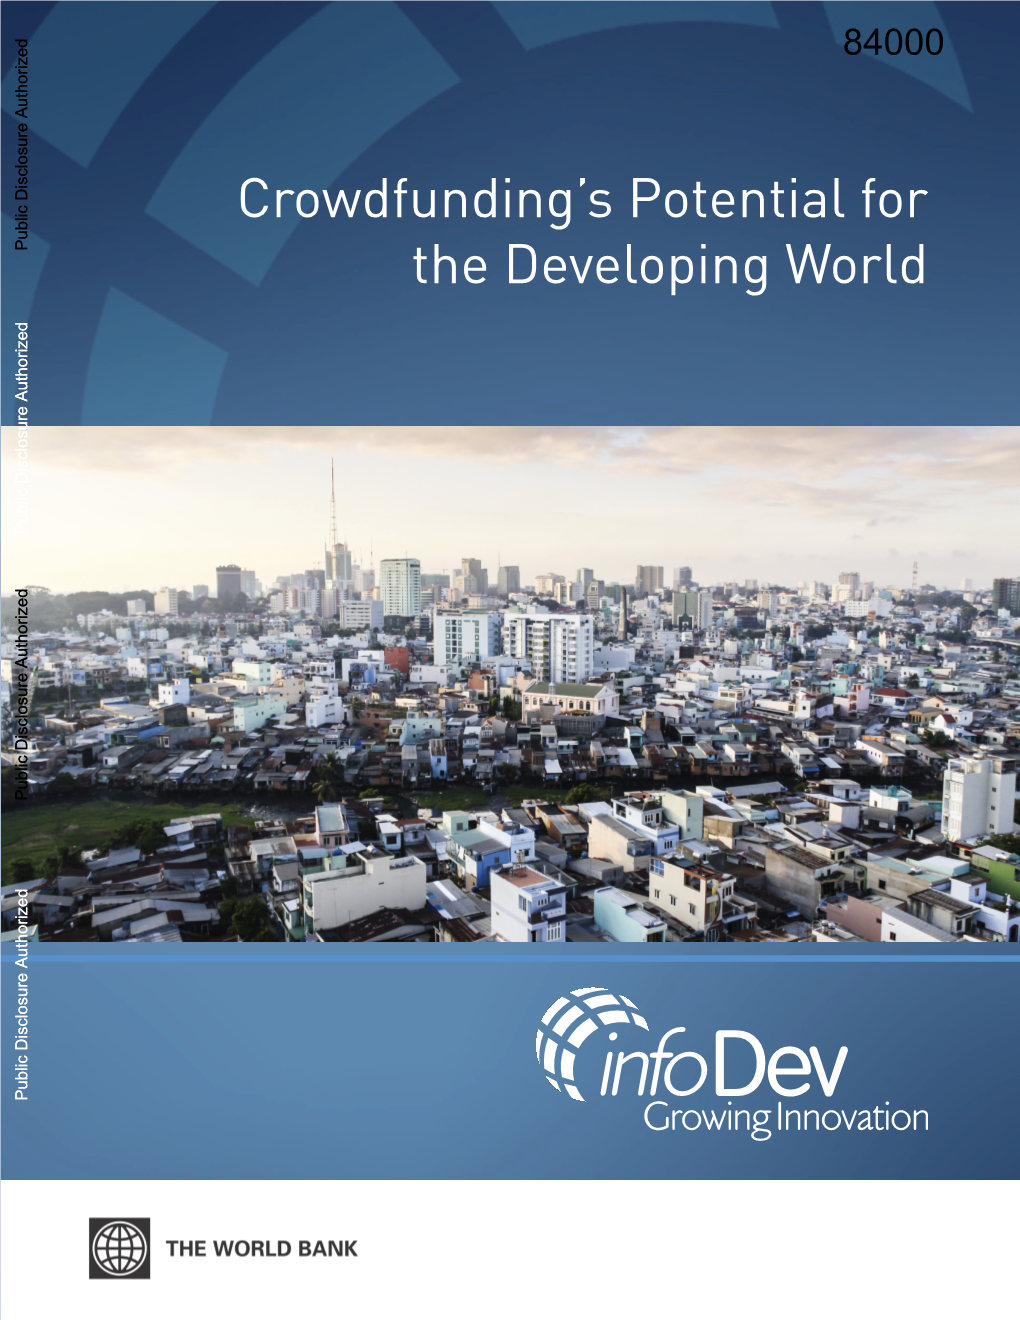 Crowdfunding's Potential for the Developing World